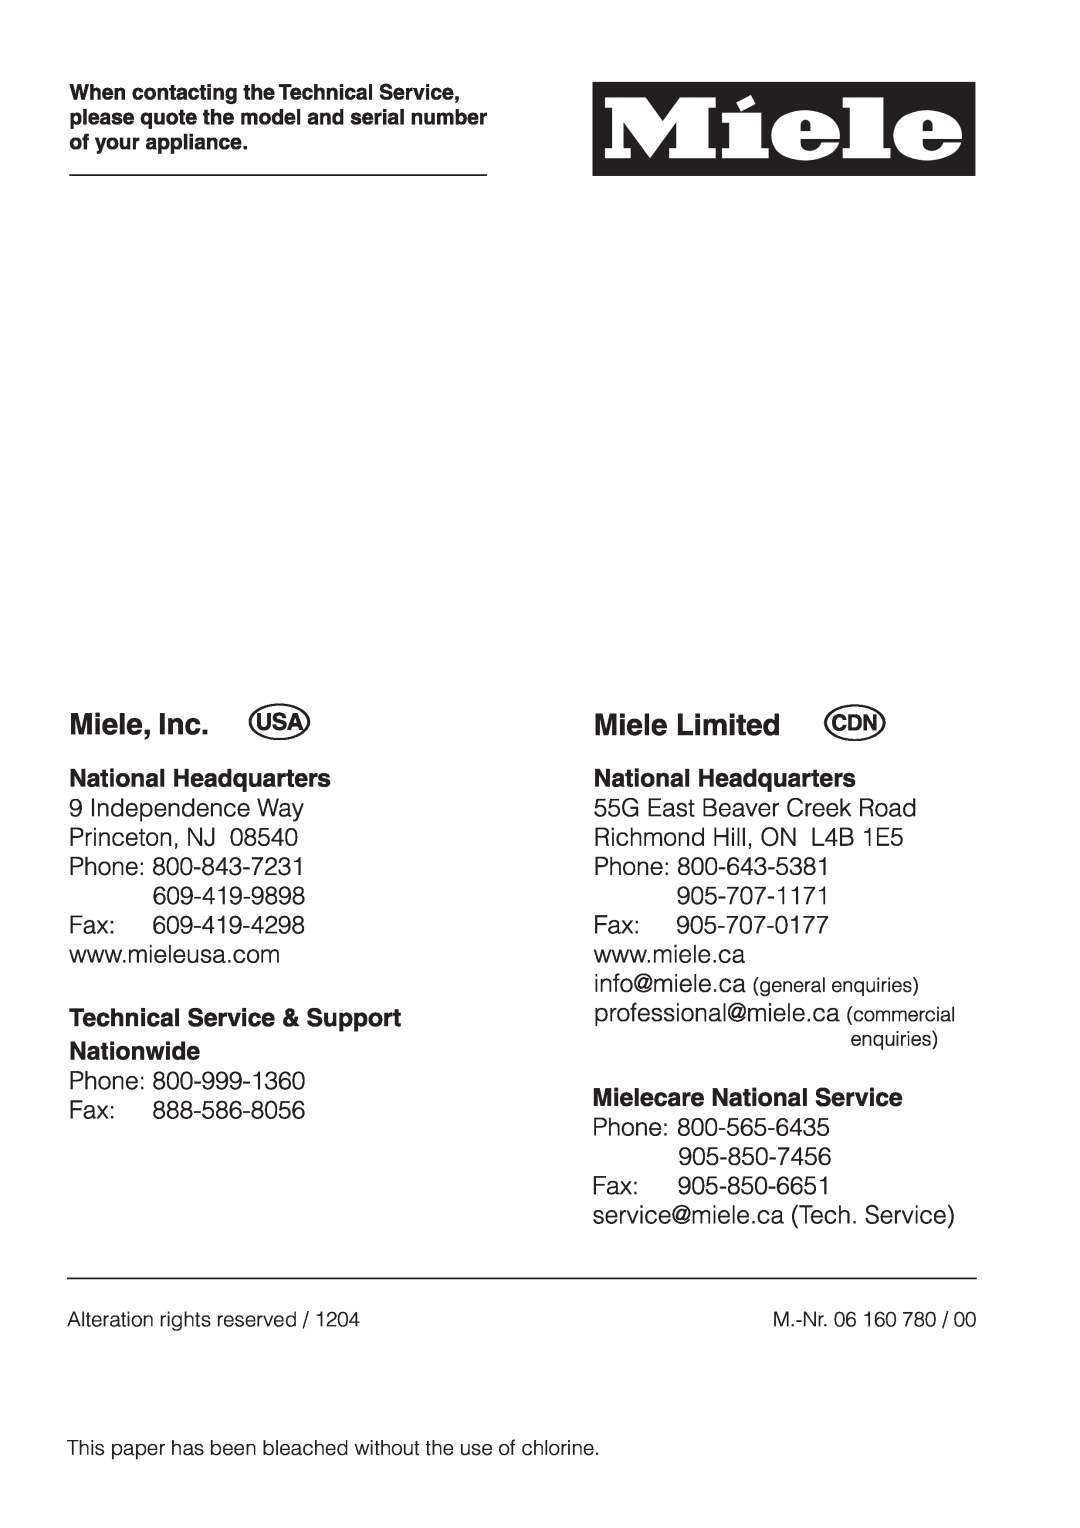 Miele H396B, H395B operating instructions Alteration rights reserved, M.-Nr.06 